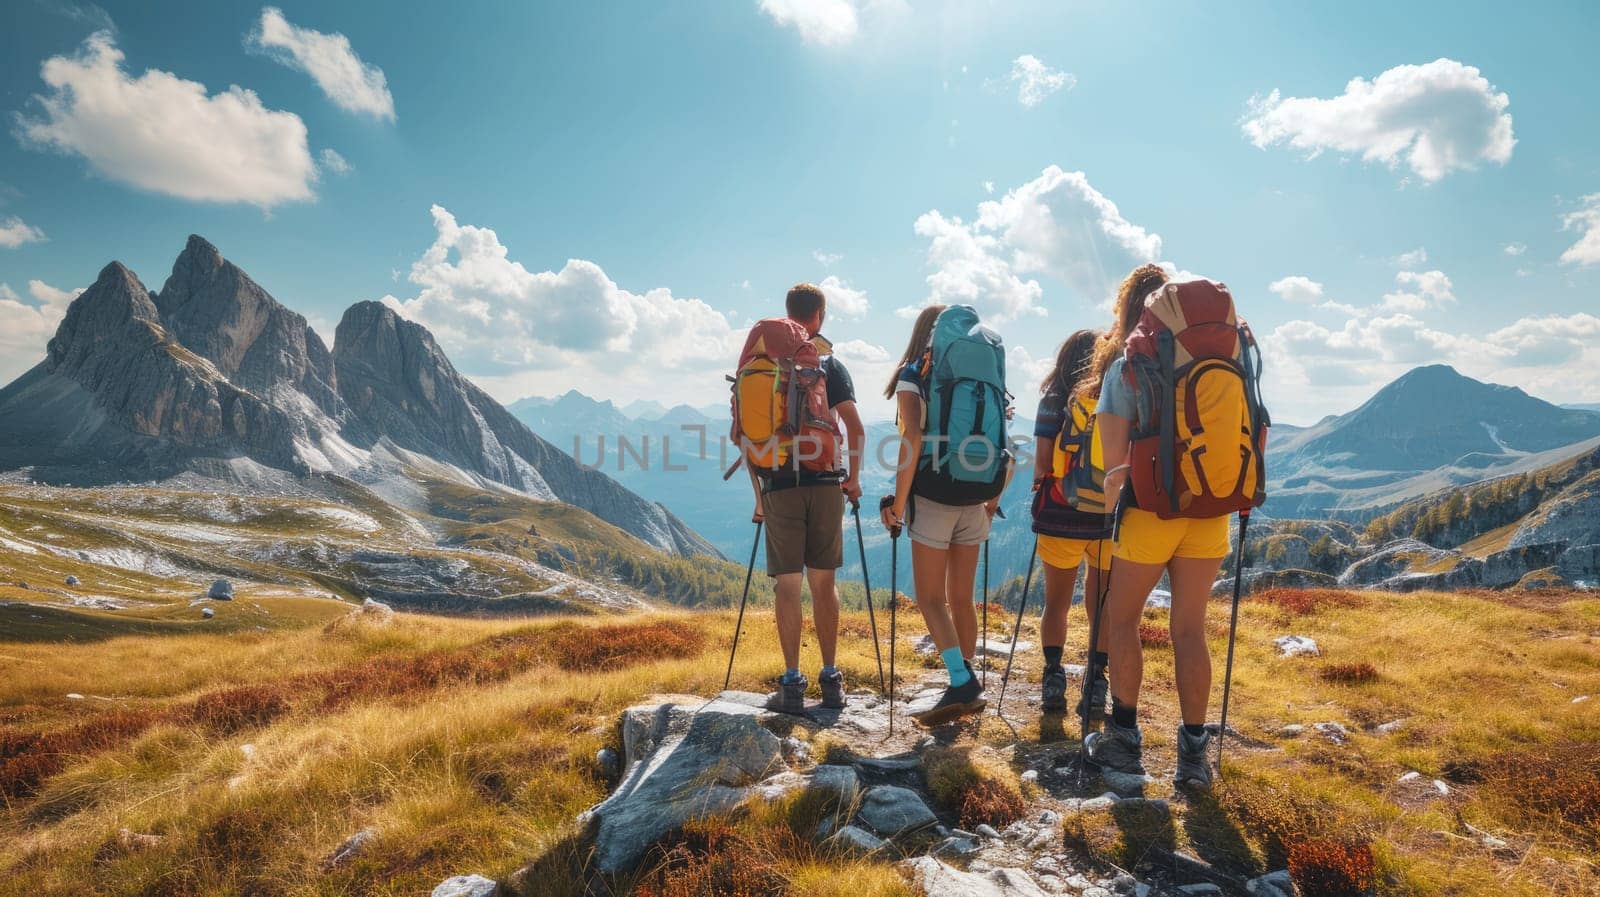 A group of friends on a hiking adventure, panoramic mountain views, capturing the spirit of friendship and exploration. Resplendent.